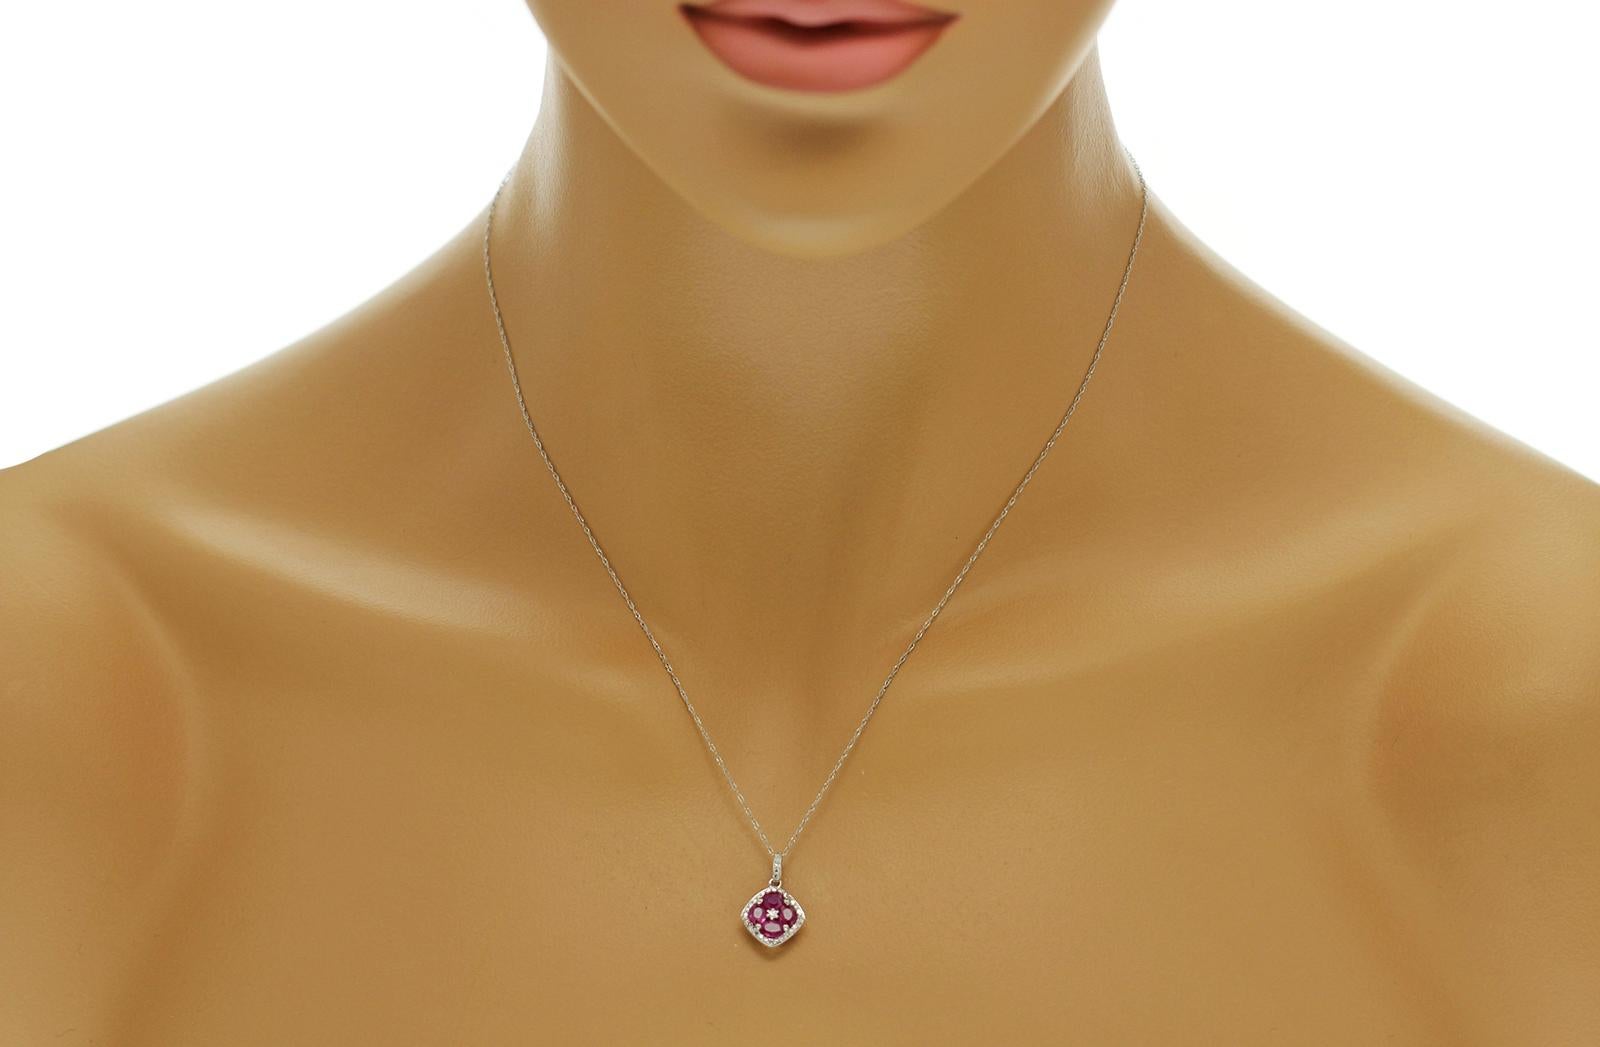 100% Authentic, 100% Customer Satisfaction

Pendant: 12 mm

Chain: 0.5mm

Size: 18 Inches

Metal: 14K White Gold

Hallmarks: 14K

Total Weight: 1.6 Grams

Stone Type: 1.20 CT Natural Ruby &  Diamond 0.15 CT  H  SI1

Condition: New With Tag 